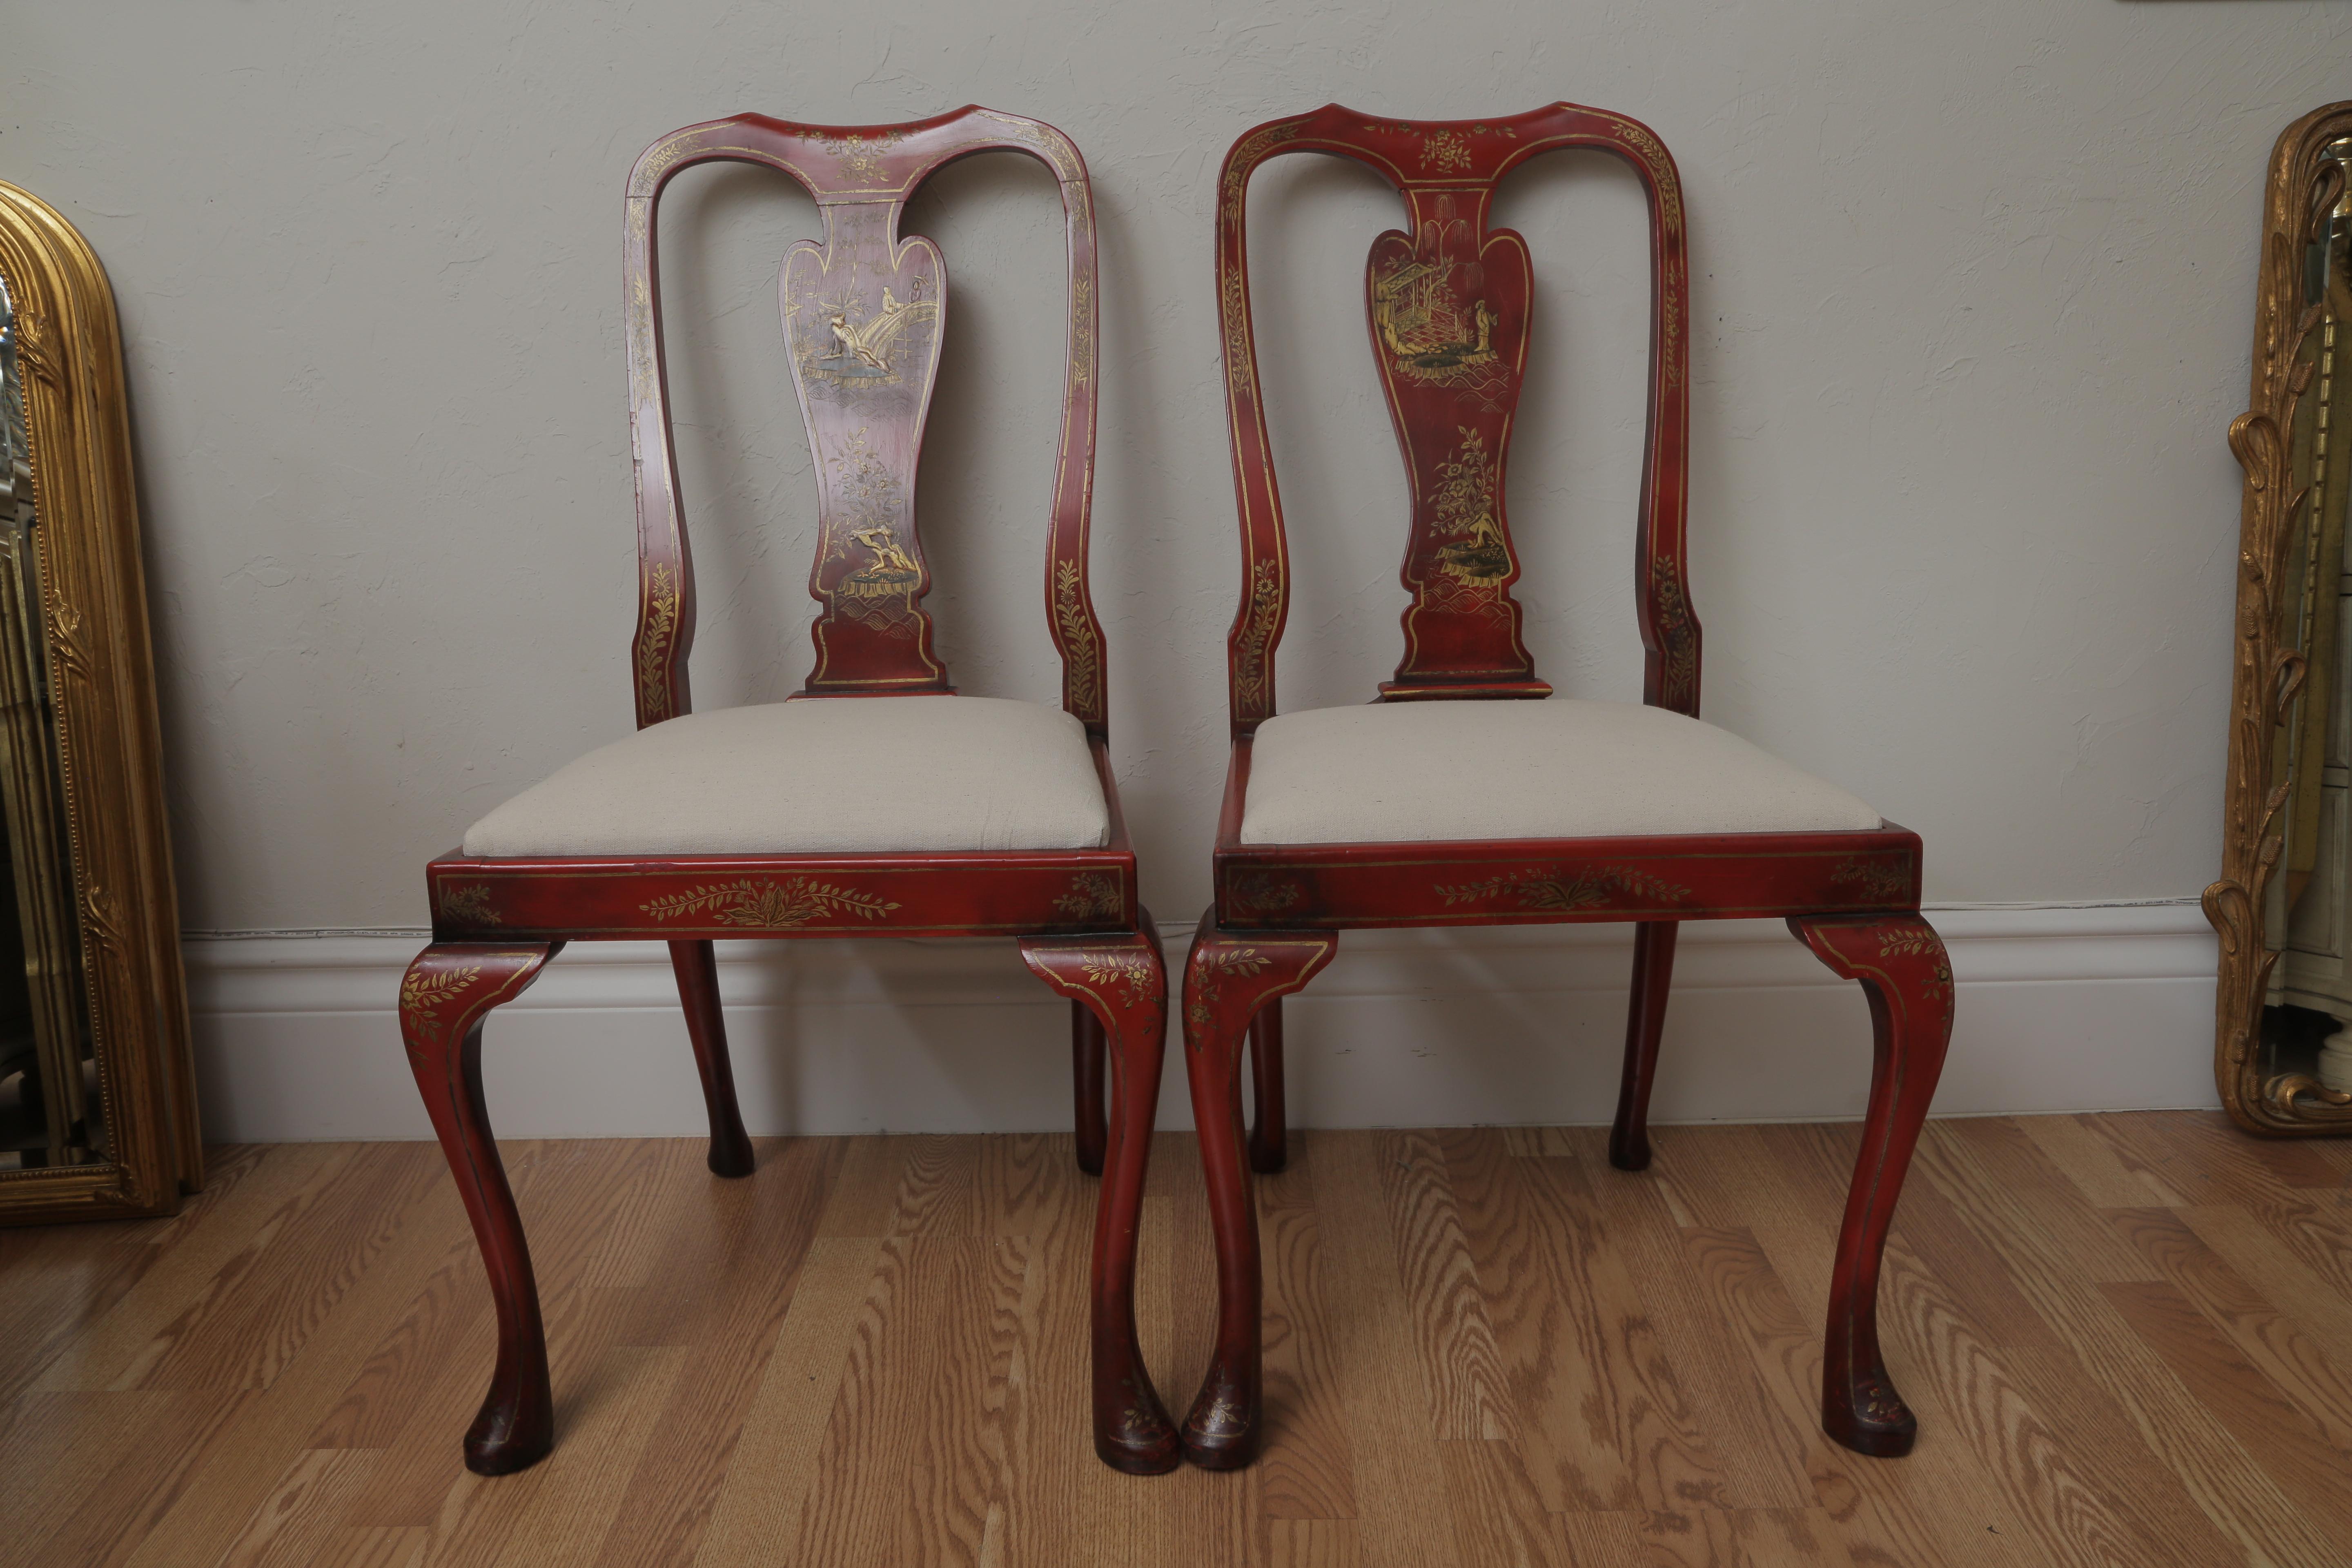 Wonderful set of eight red chinoiserie dining chairs consisting of two armchairs & six sides. Newly upholstered seat cushions. Each back splay is hand painted in a different scene. Very stable and good condition. An extraordinary fine set of chairs.